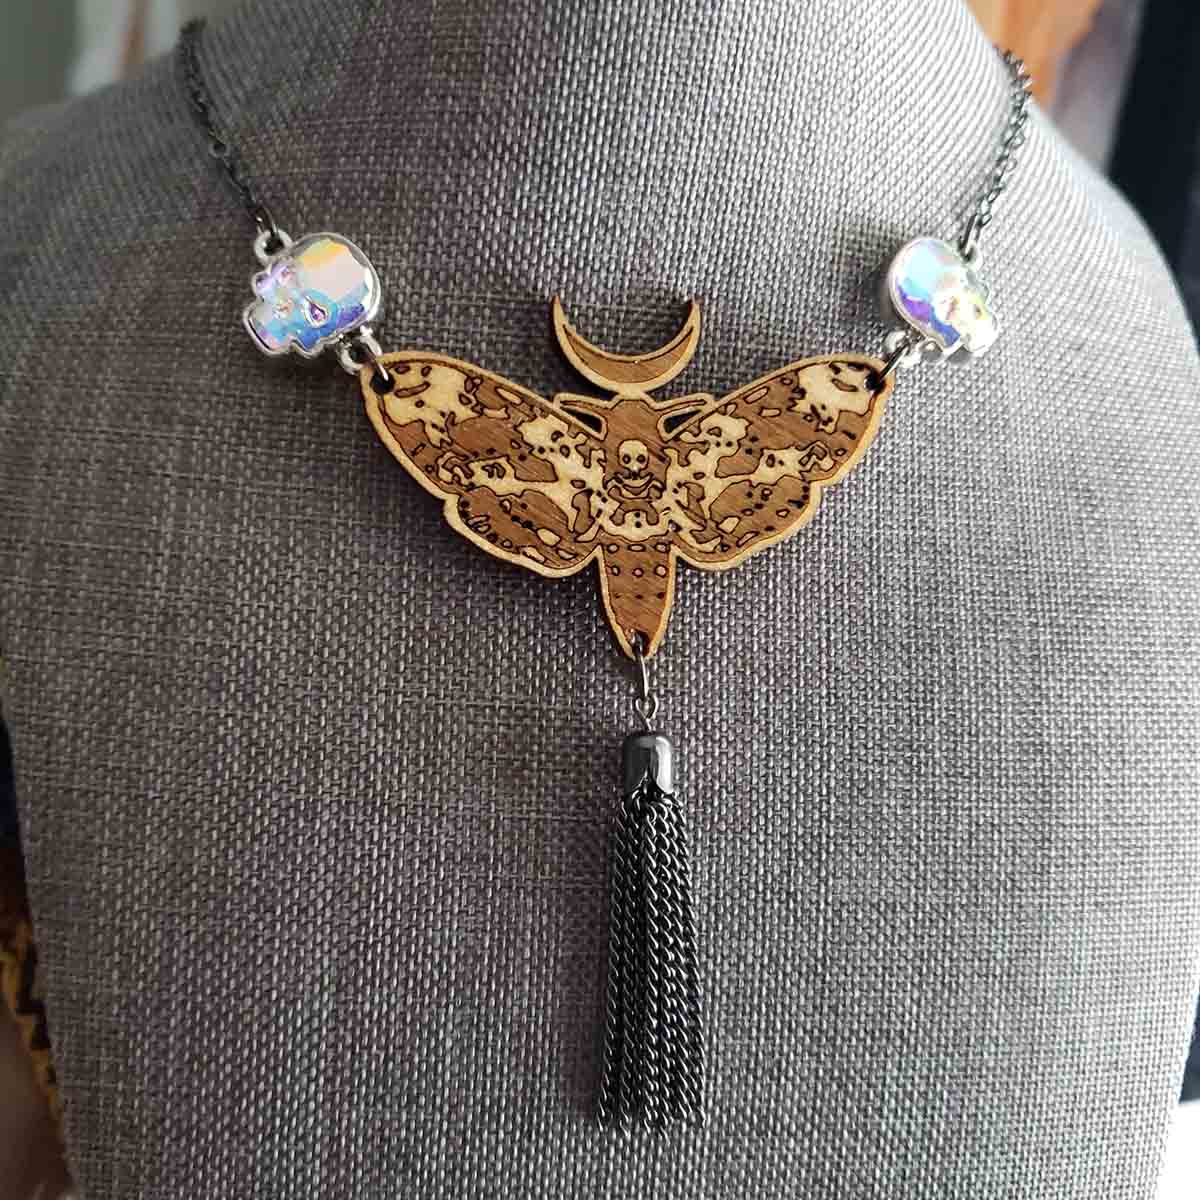 Deaths Head Moth Crescent Moon and Crystal Skulls Necklace